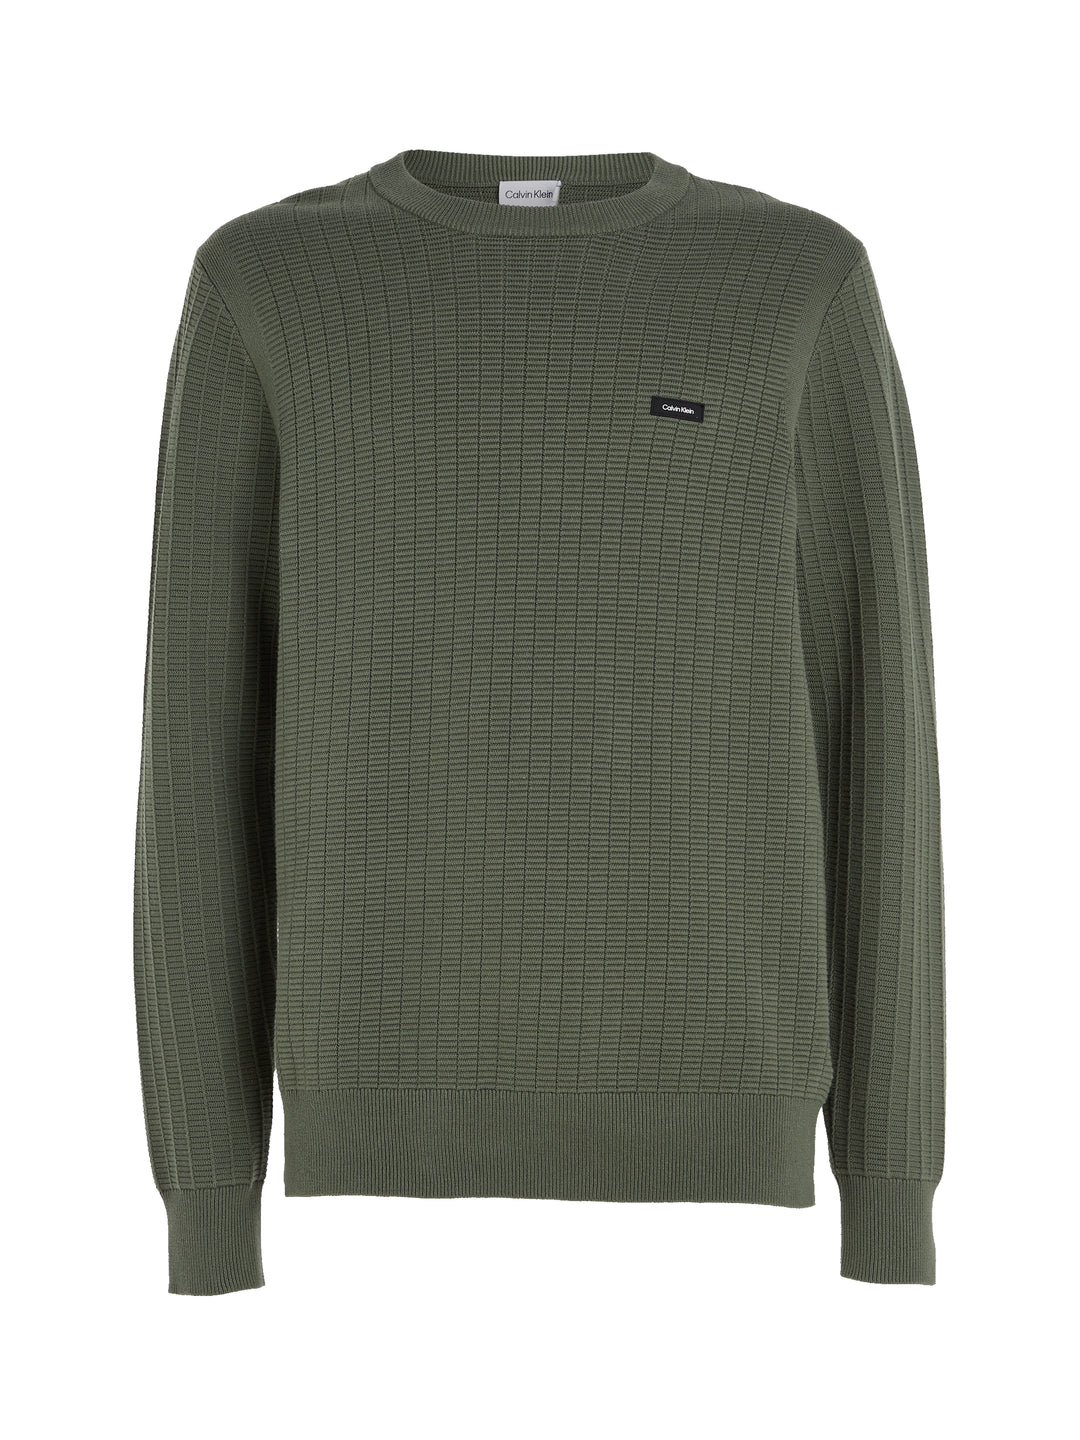 CK STRUCTURE SWEATER - THYME